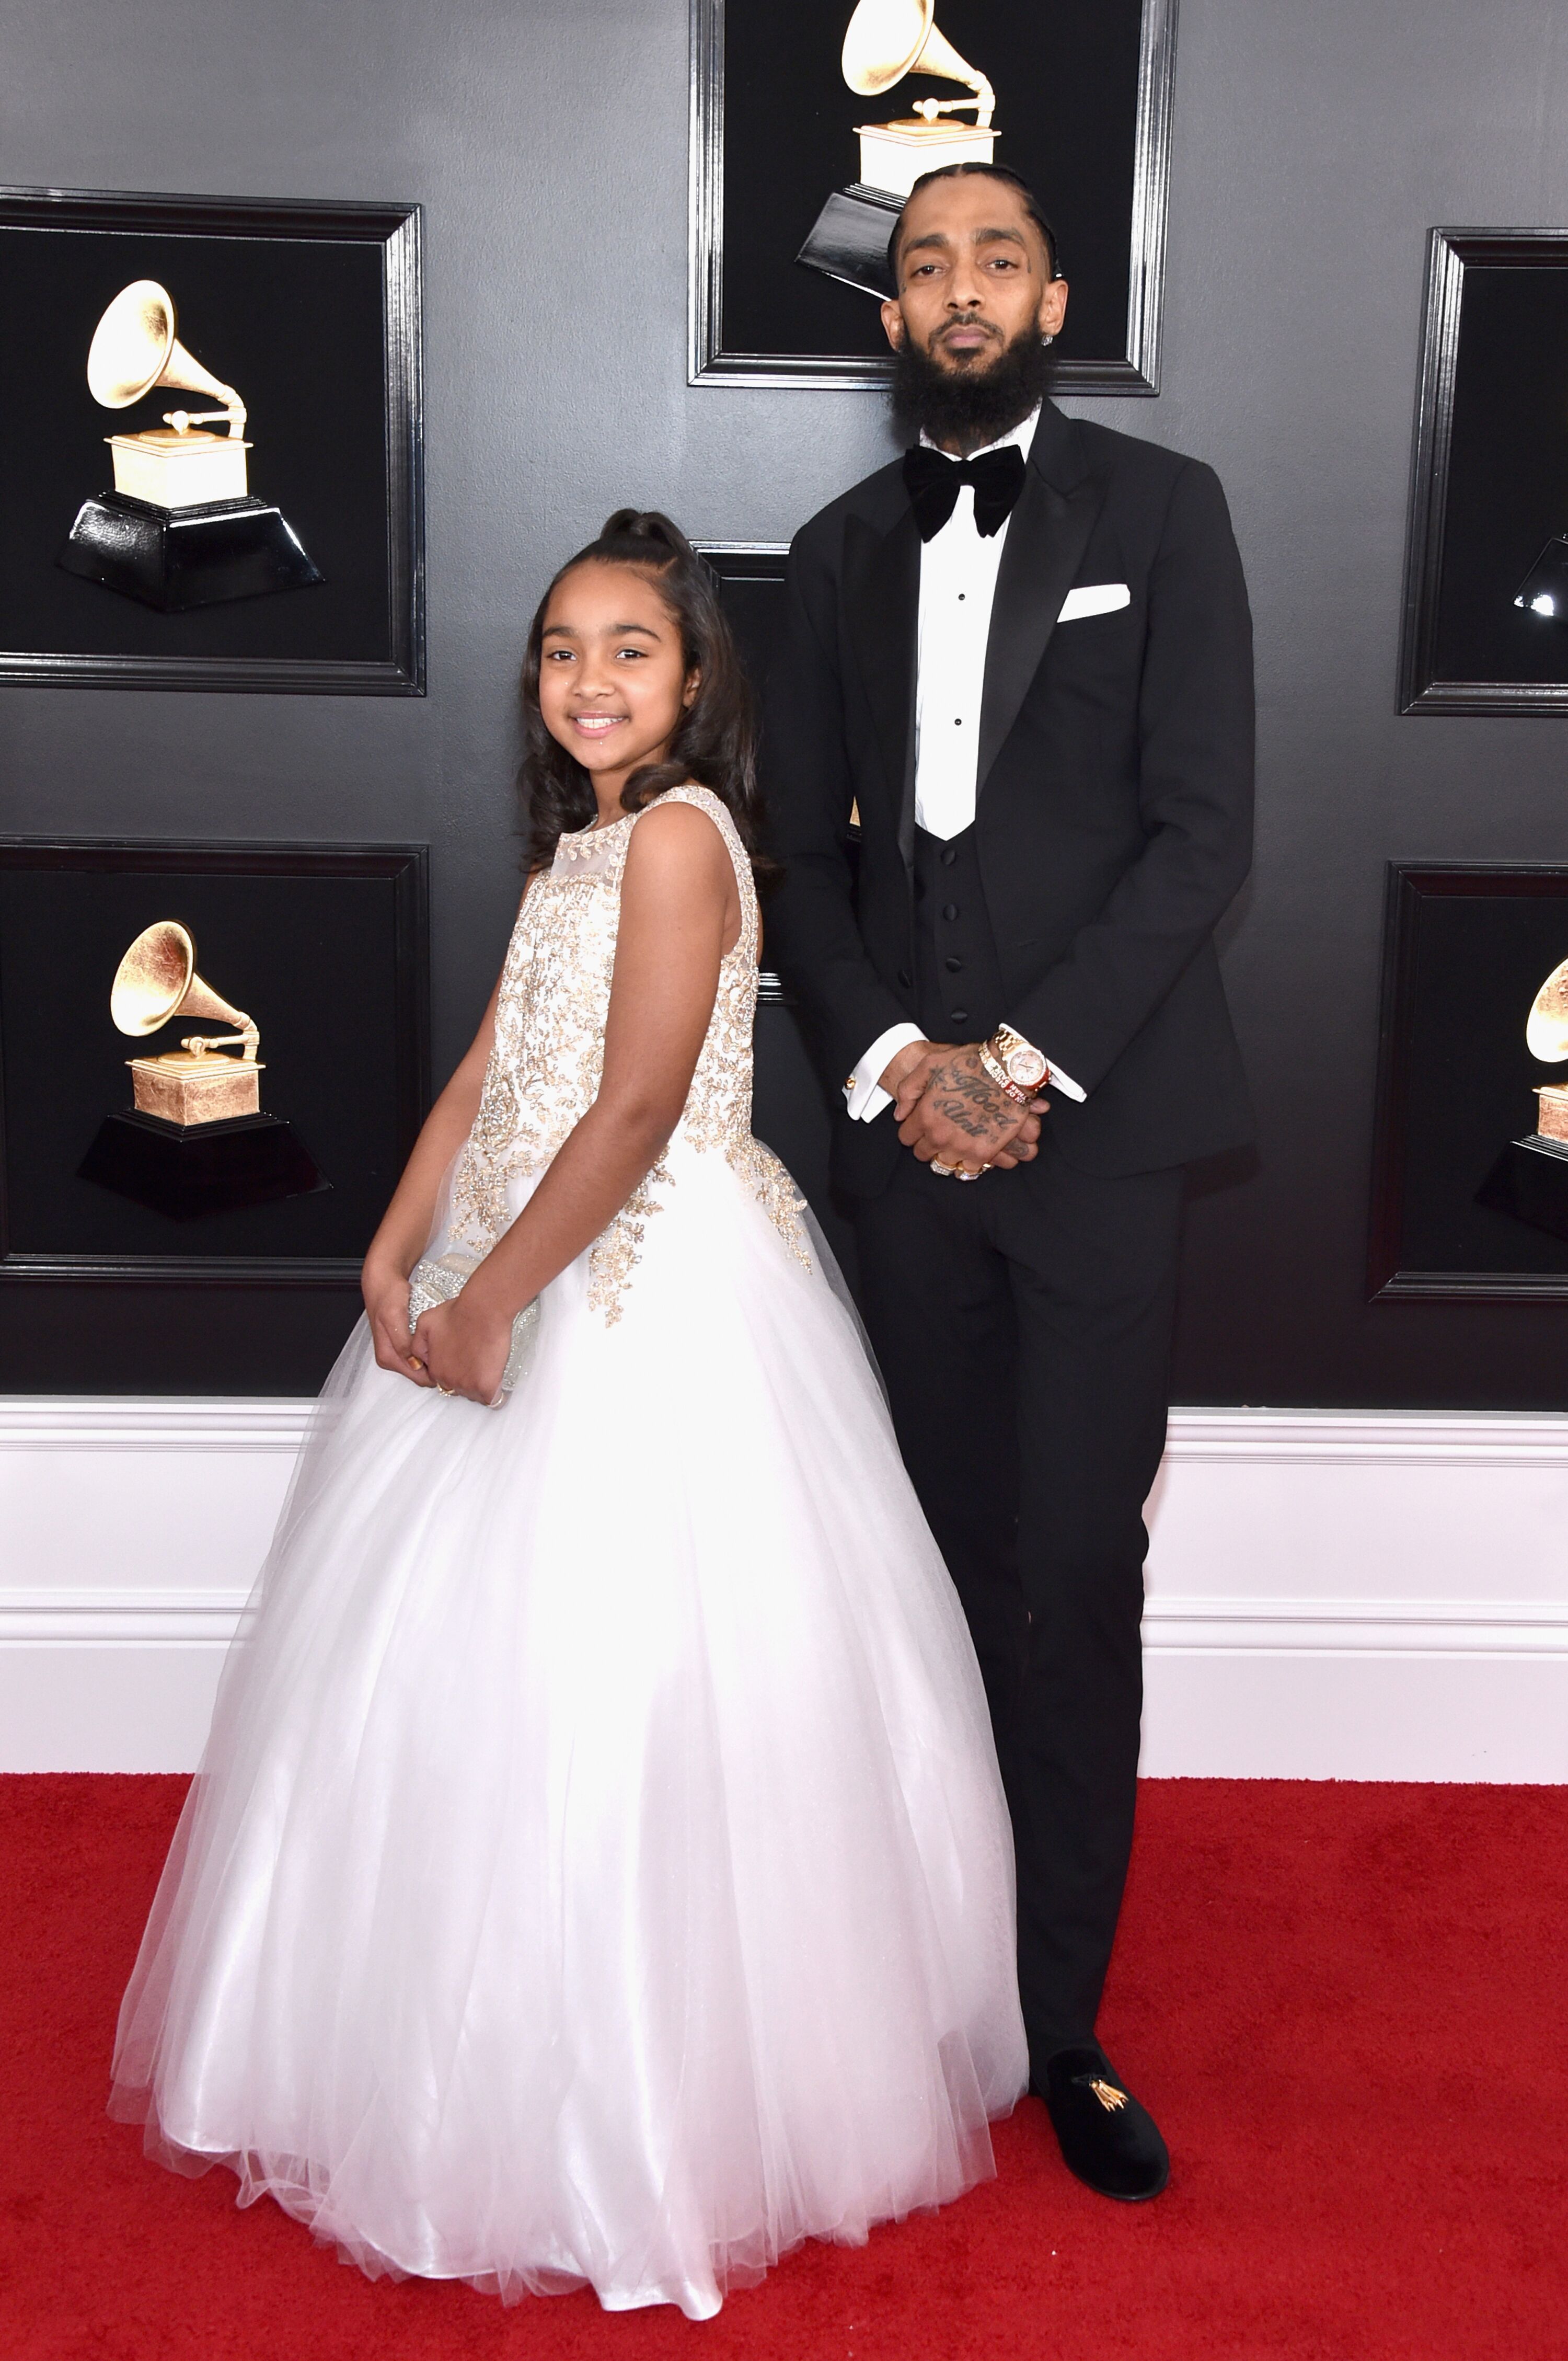 Nipsey Hussle and his daughter Emani Asghedom at the Grammys/ Source: Getty Imgaes